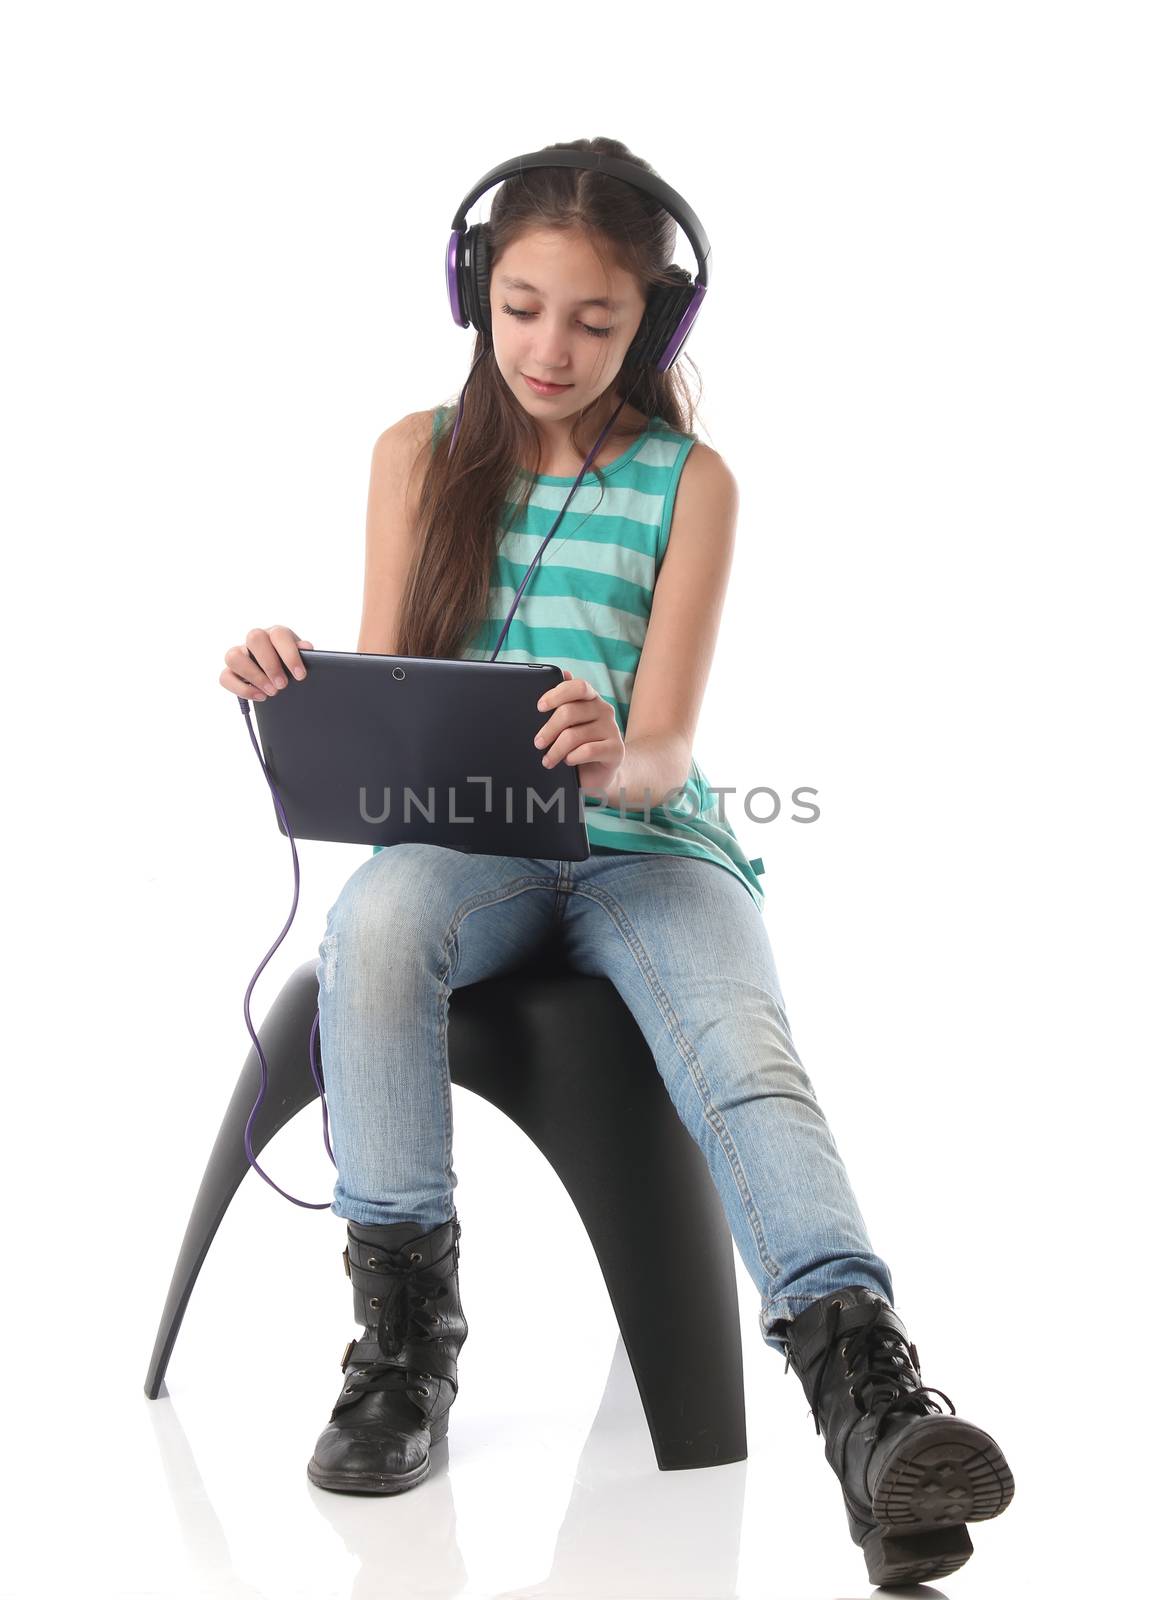 Beautiful pre-teen girl using a tablet computer and headphones.